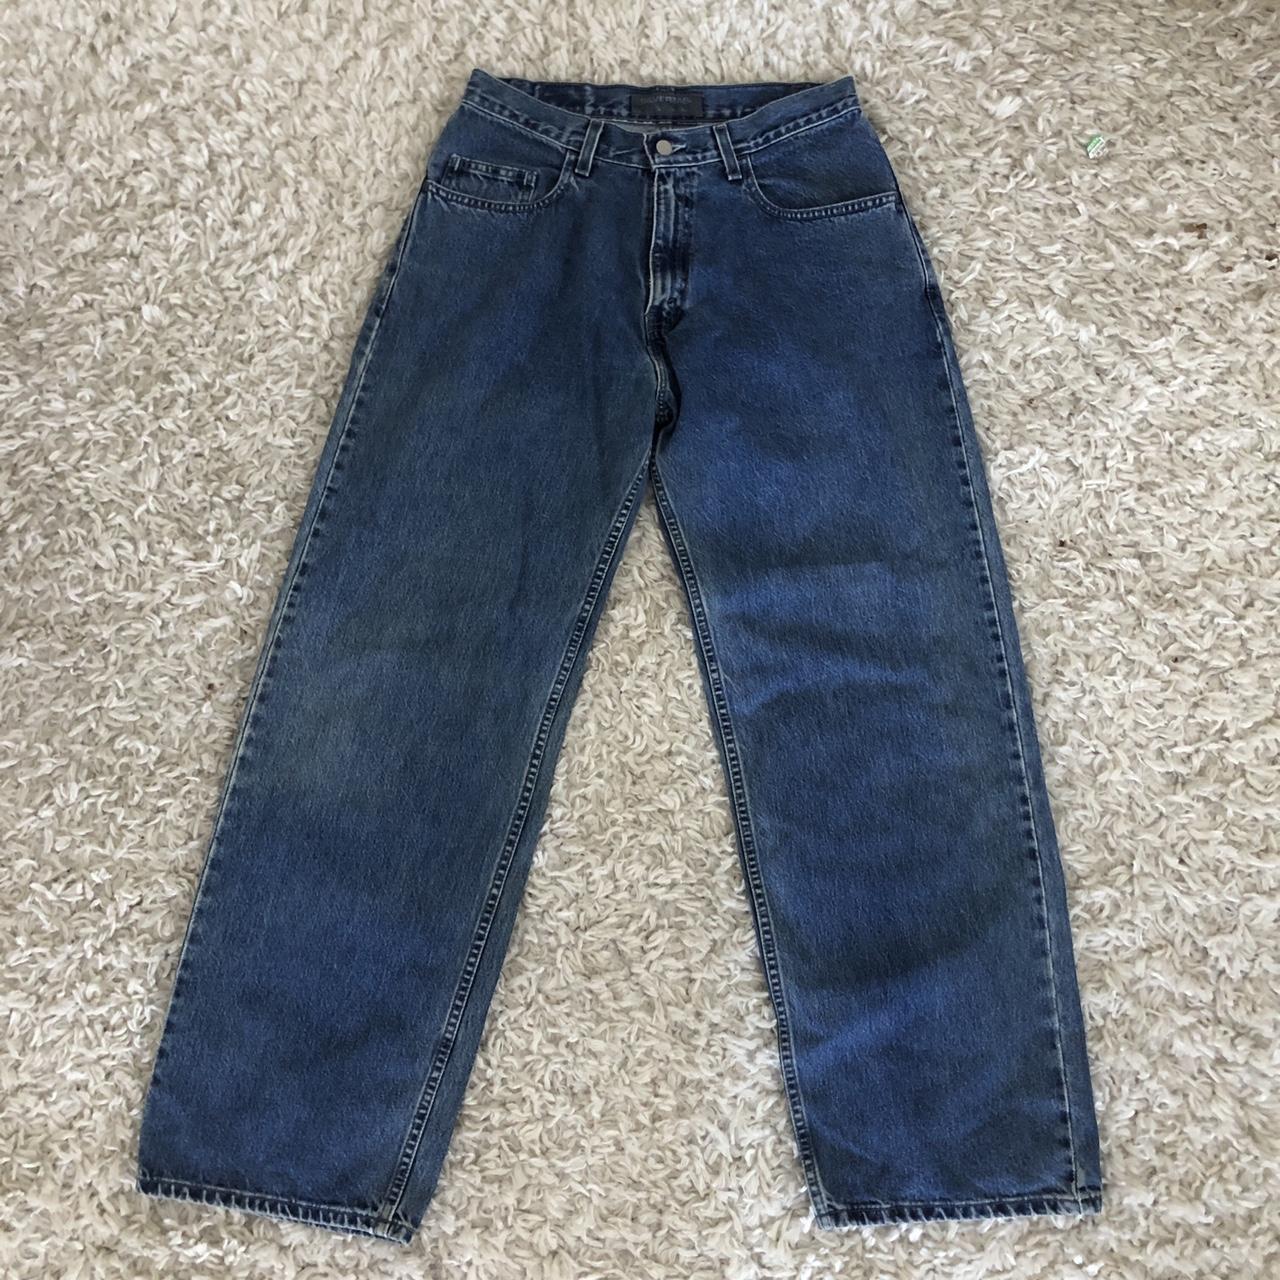 Vintage Levi Silver Tab Baggy Jeans. , Tag reads W30...